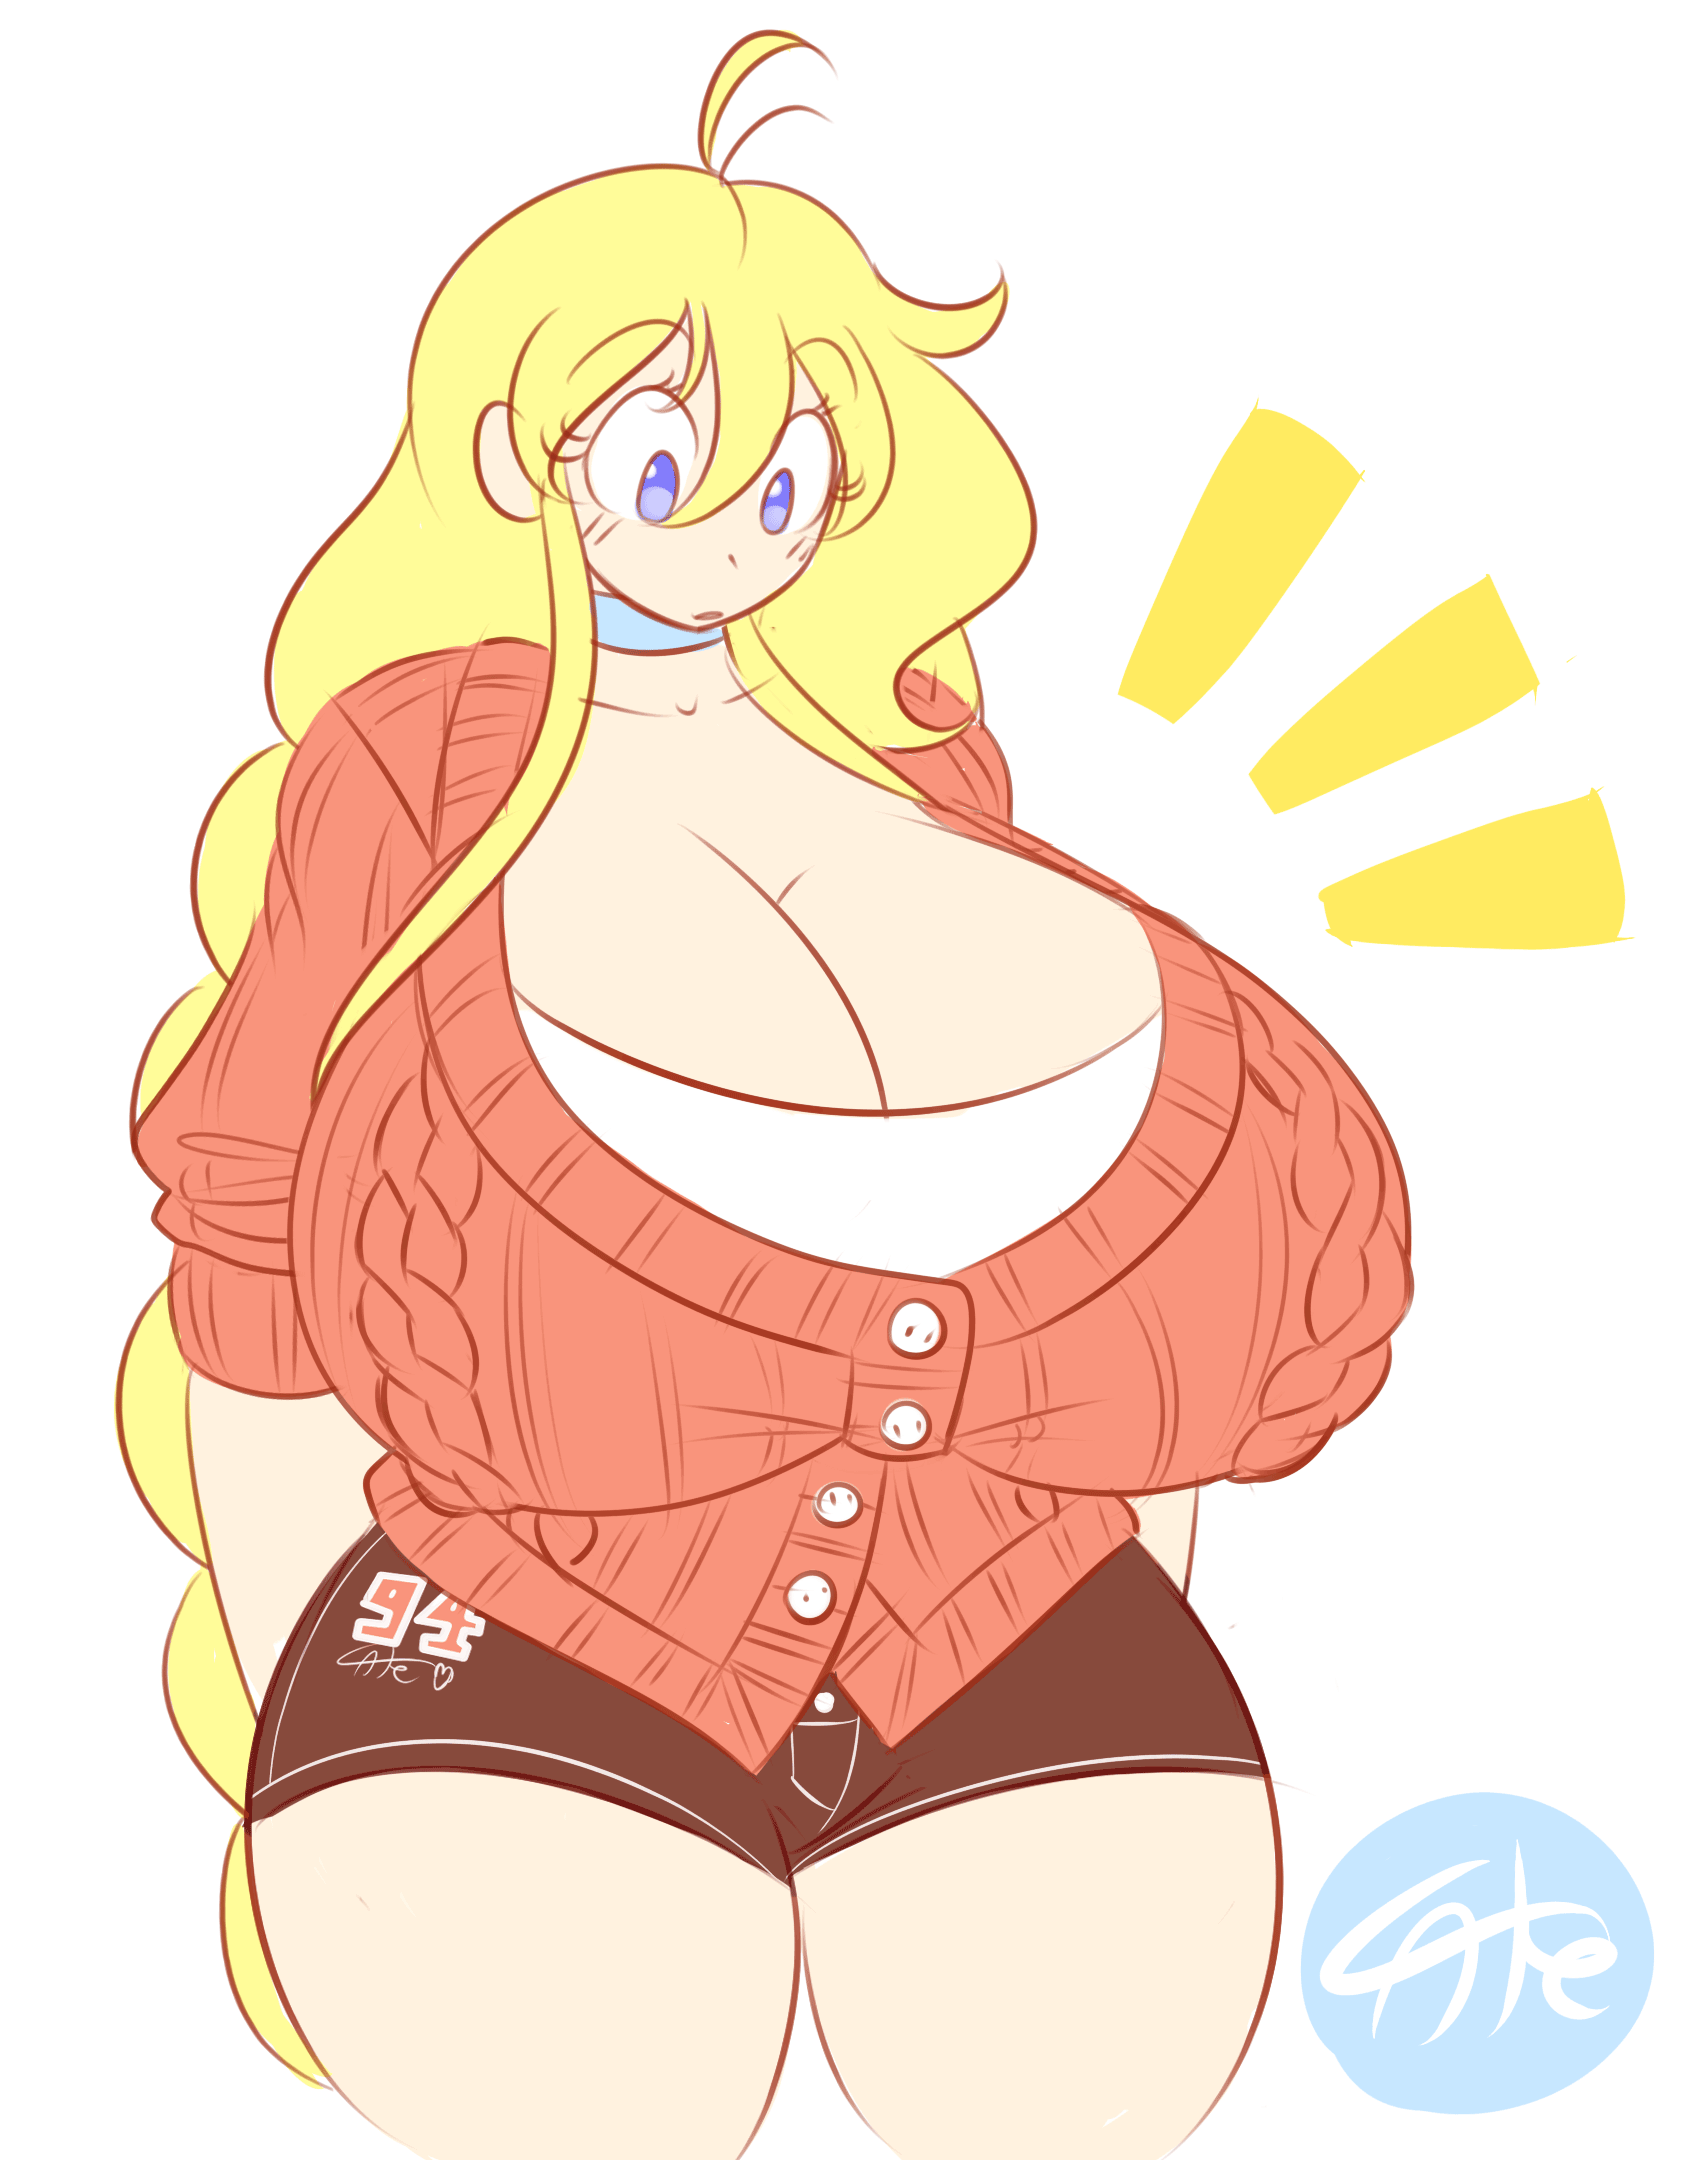 new_sweater gif by_theycallhimcake-d7juaot.gif 